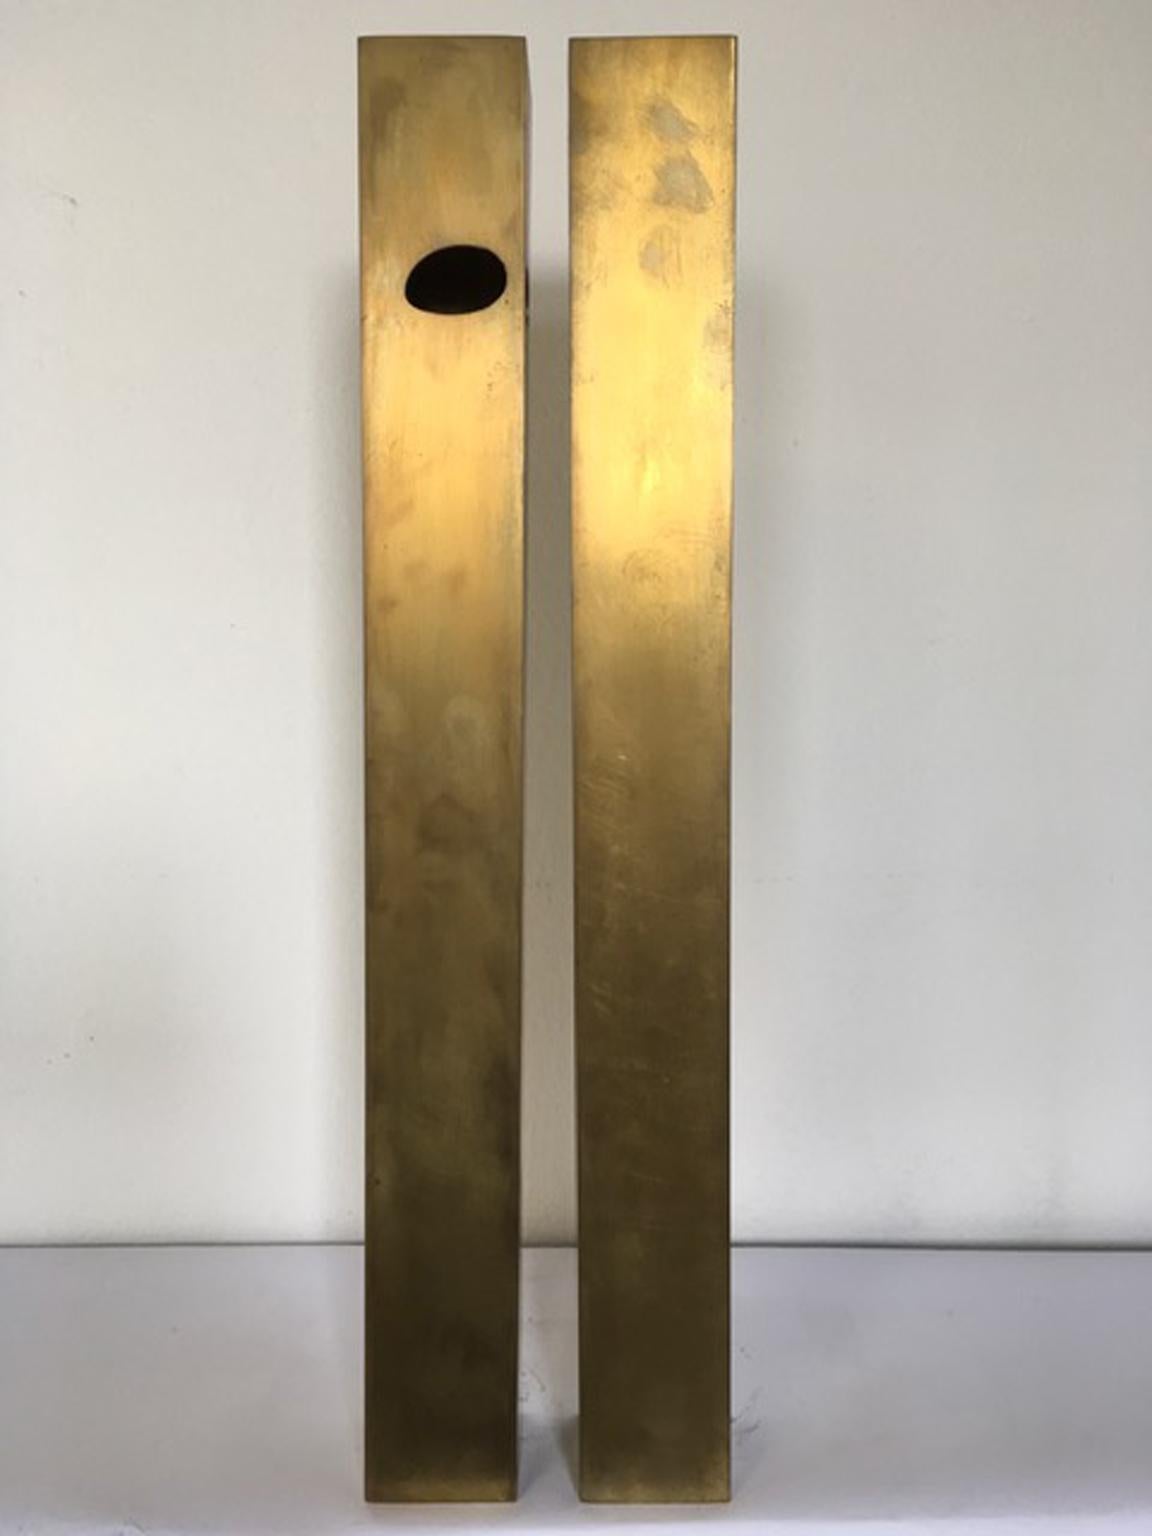 Italy 1998 the Skyscrapers Brass Abstract Sculpture For Sale 7